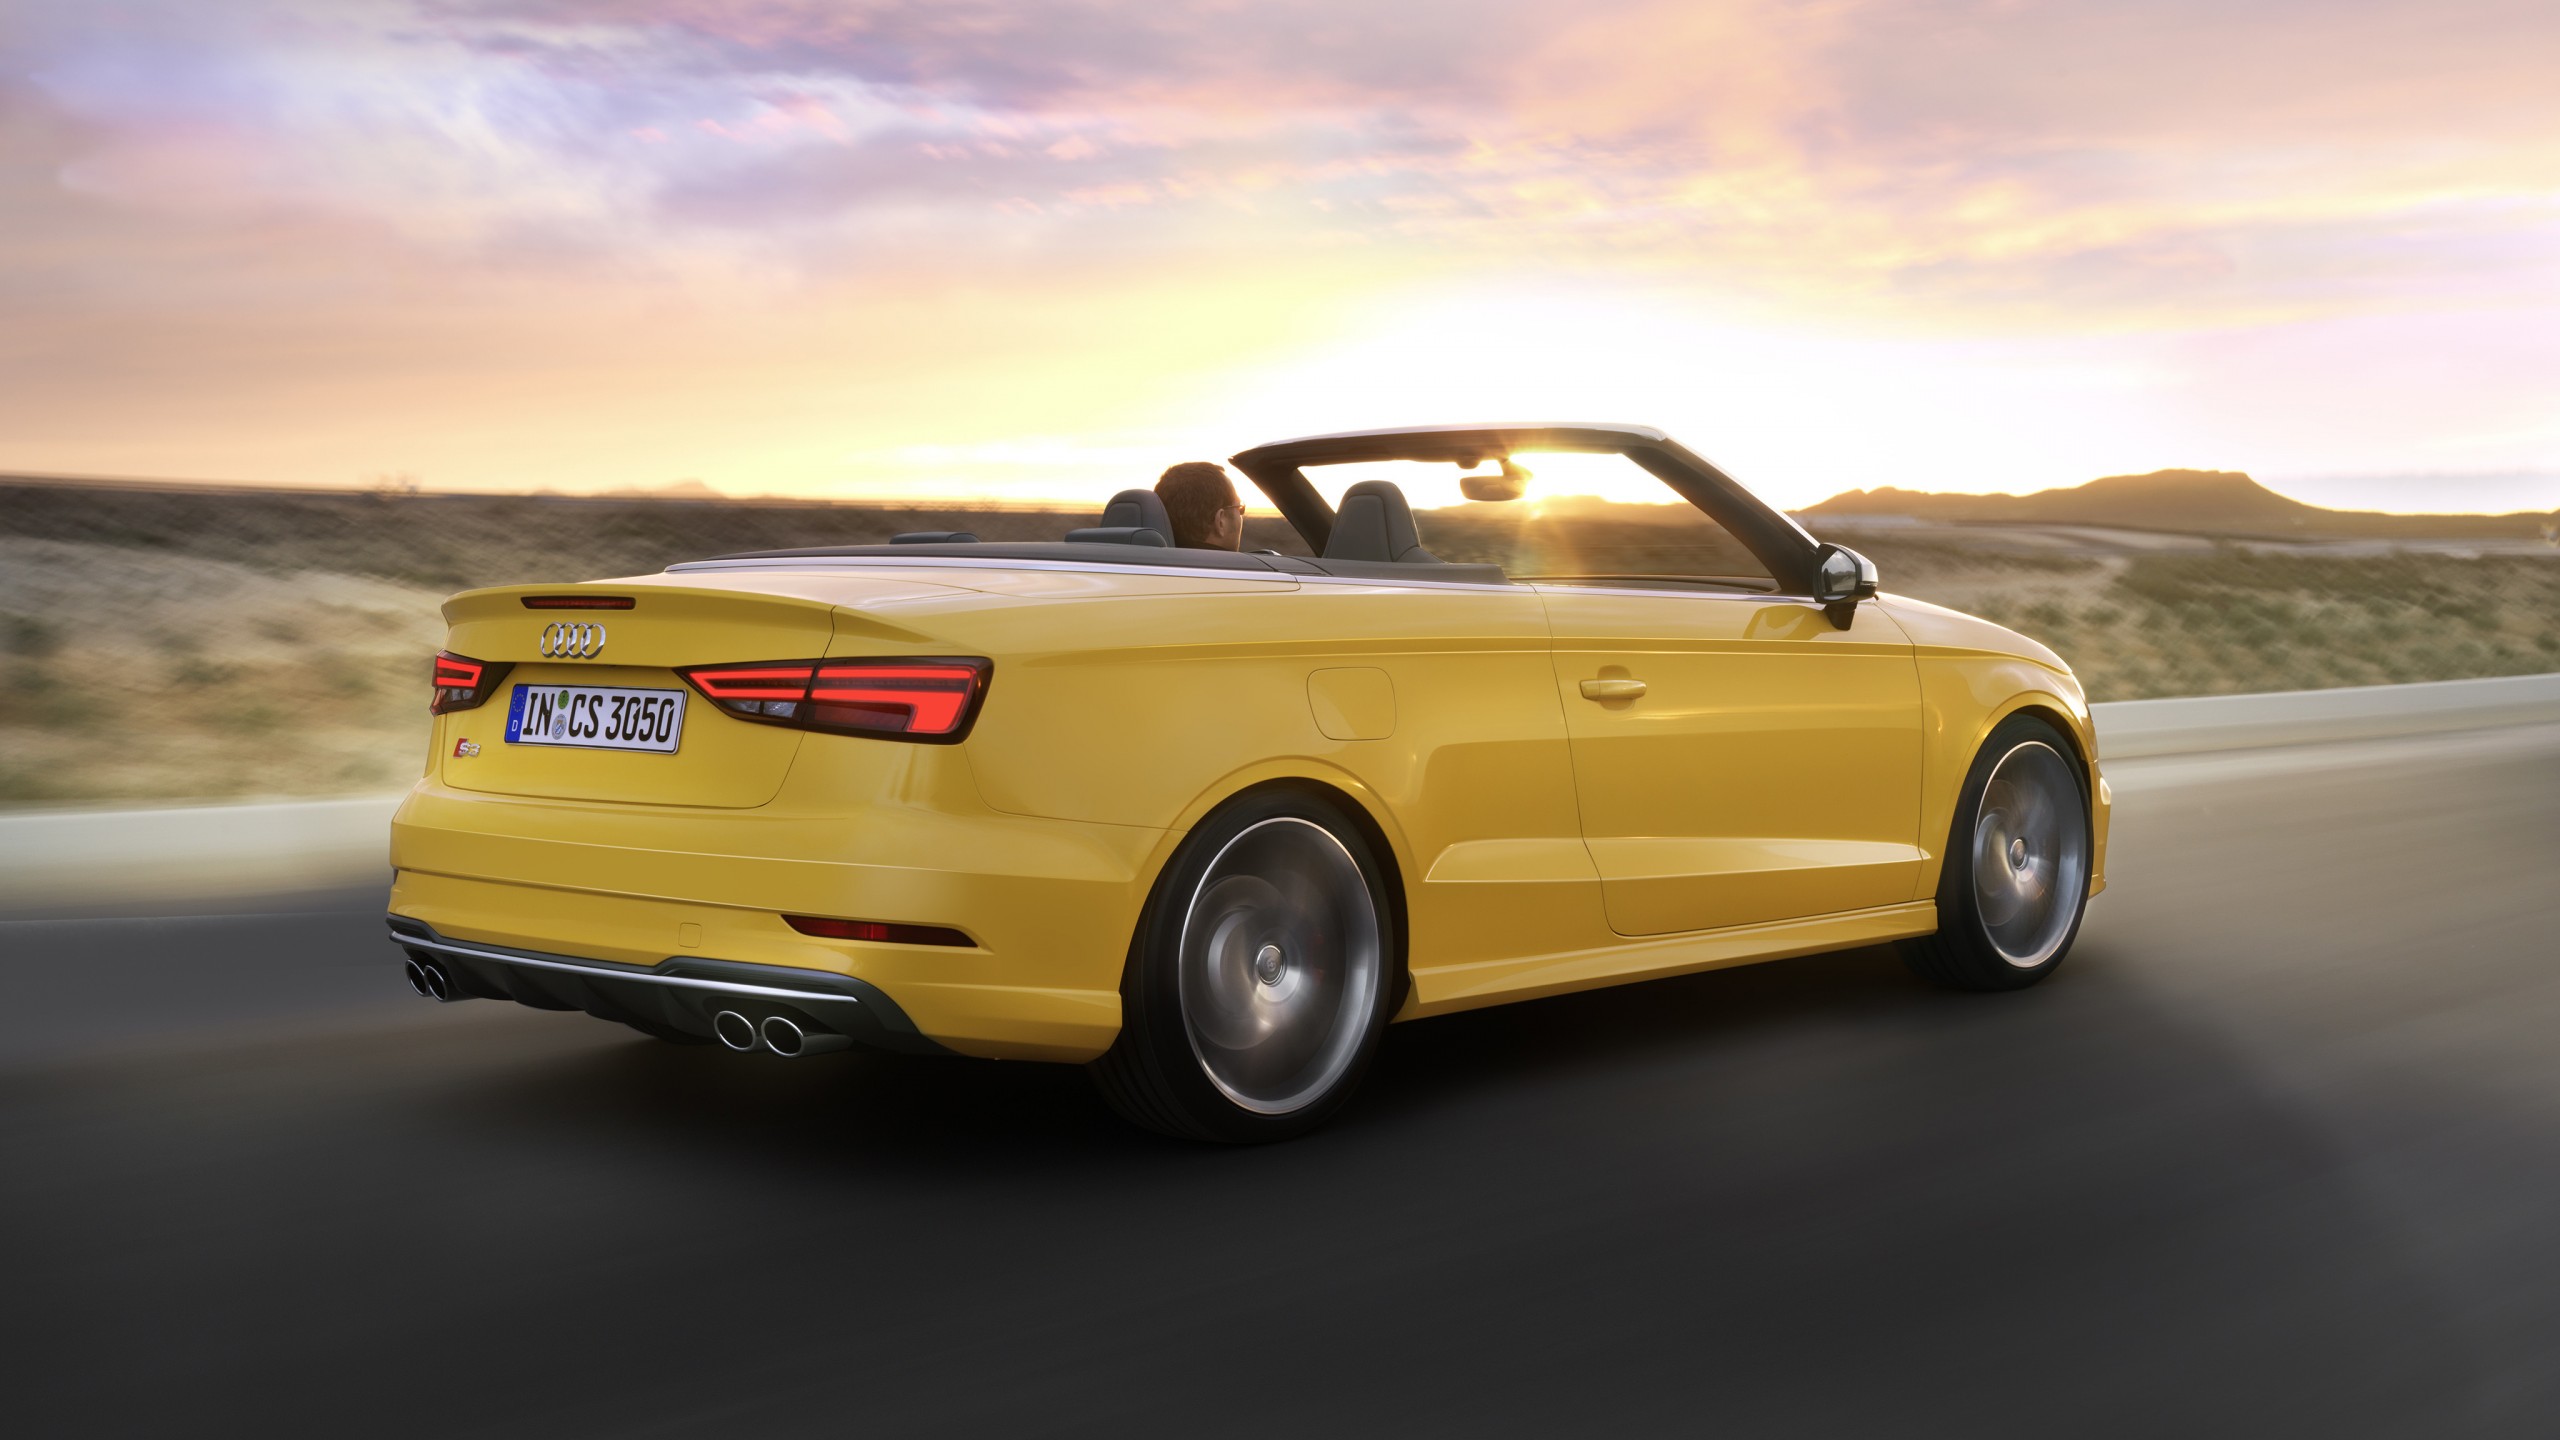 Wallpaper Audi S3 Cabriolet Yellow Cars Bikes